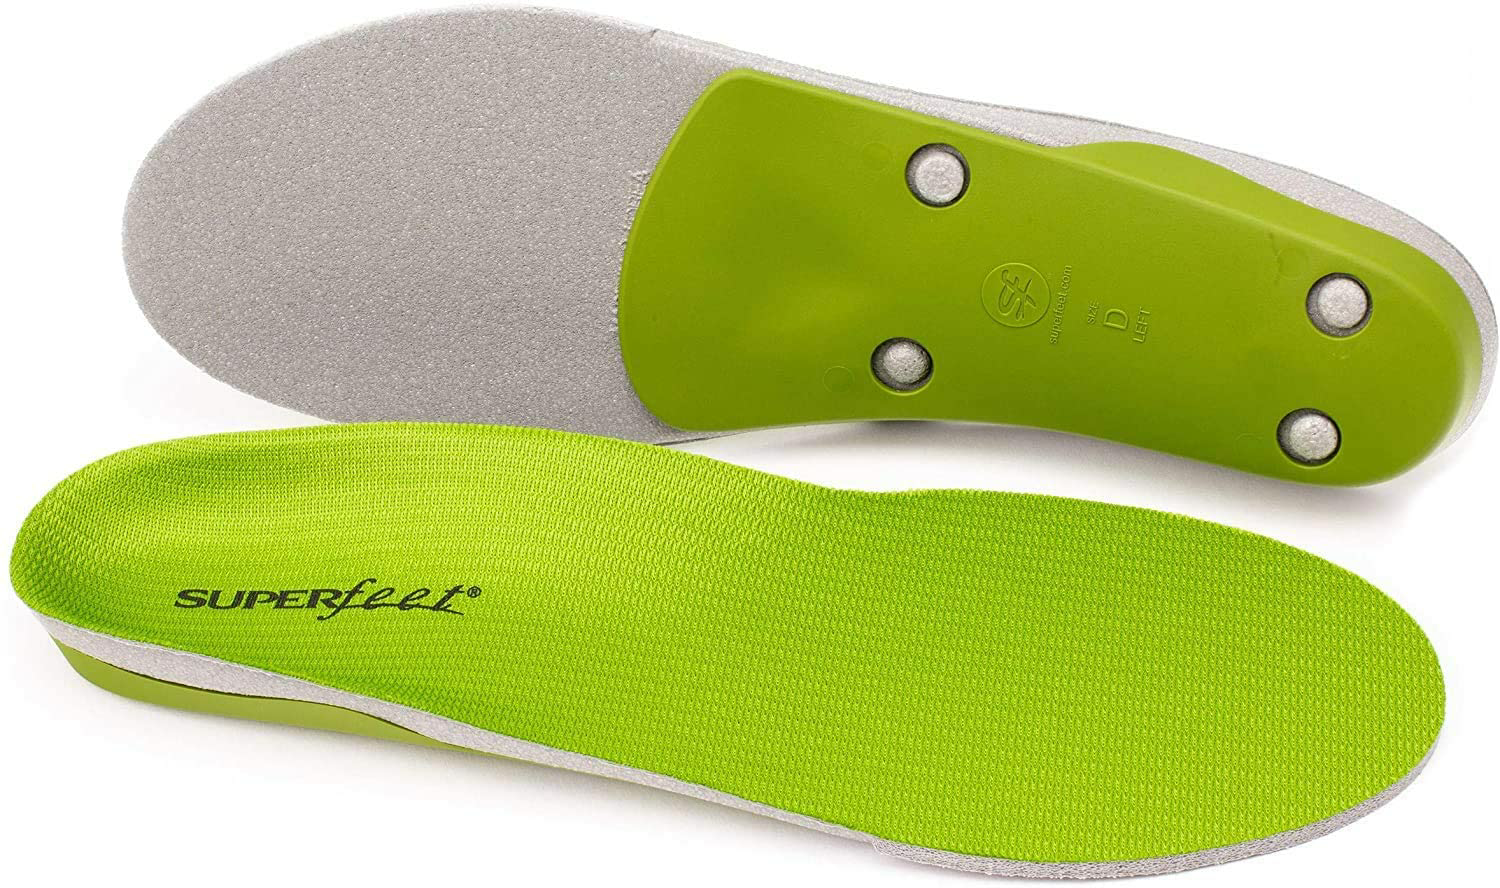 Amazon.com: Superfeet GREEN Professional-Grade High Arch Orthotic Shoe Inserts for Maximum Support Insole, 9.5-11 Men / 10.5-12 Women : Health & Household $37.51